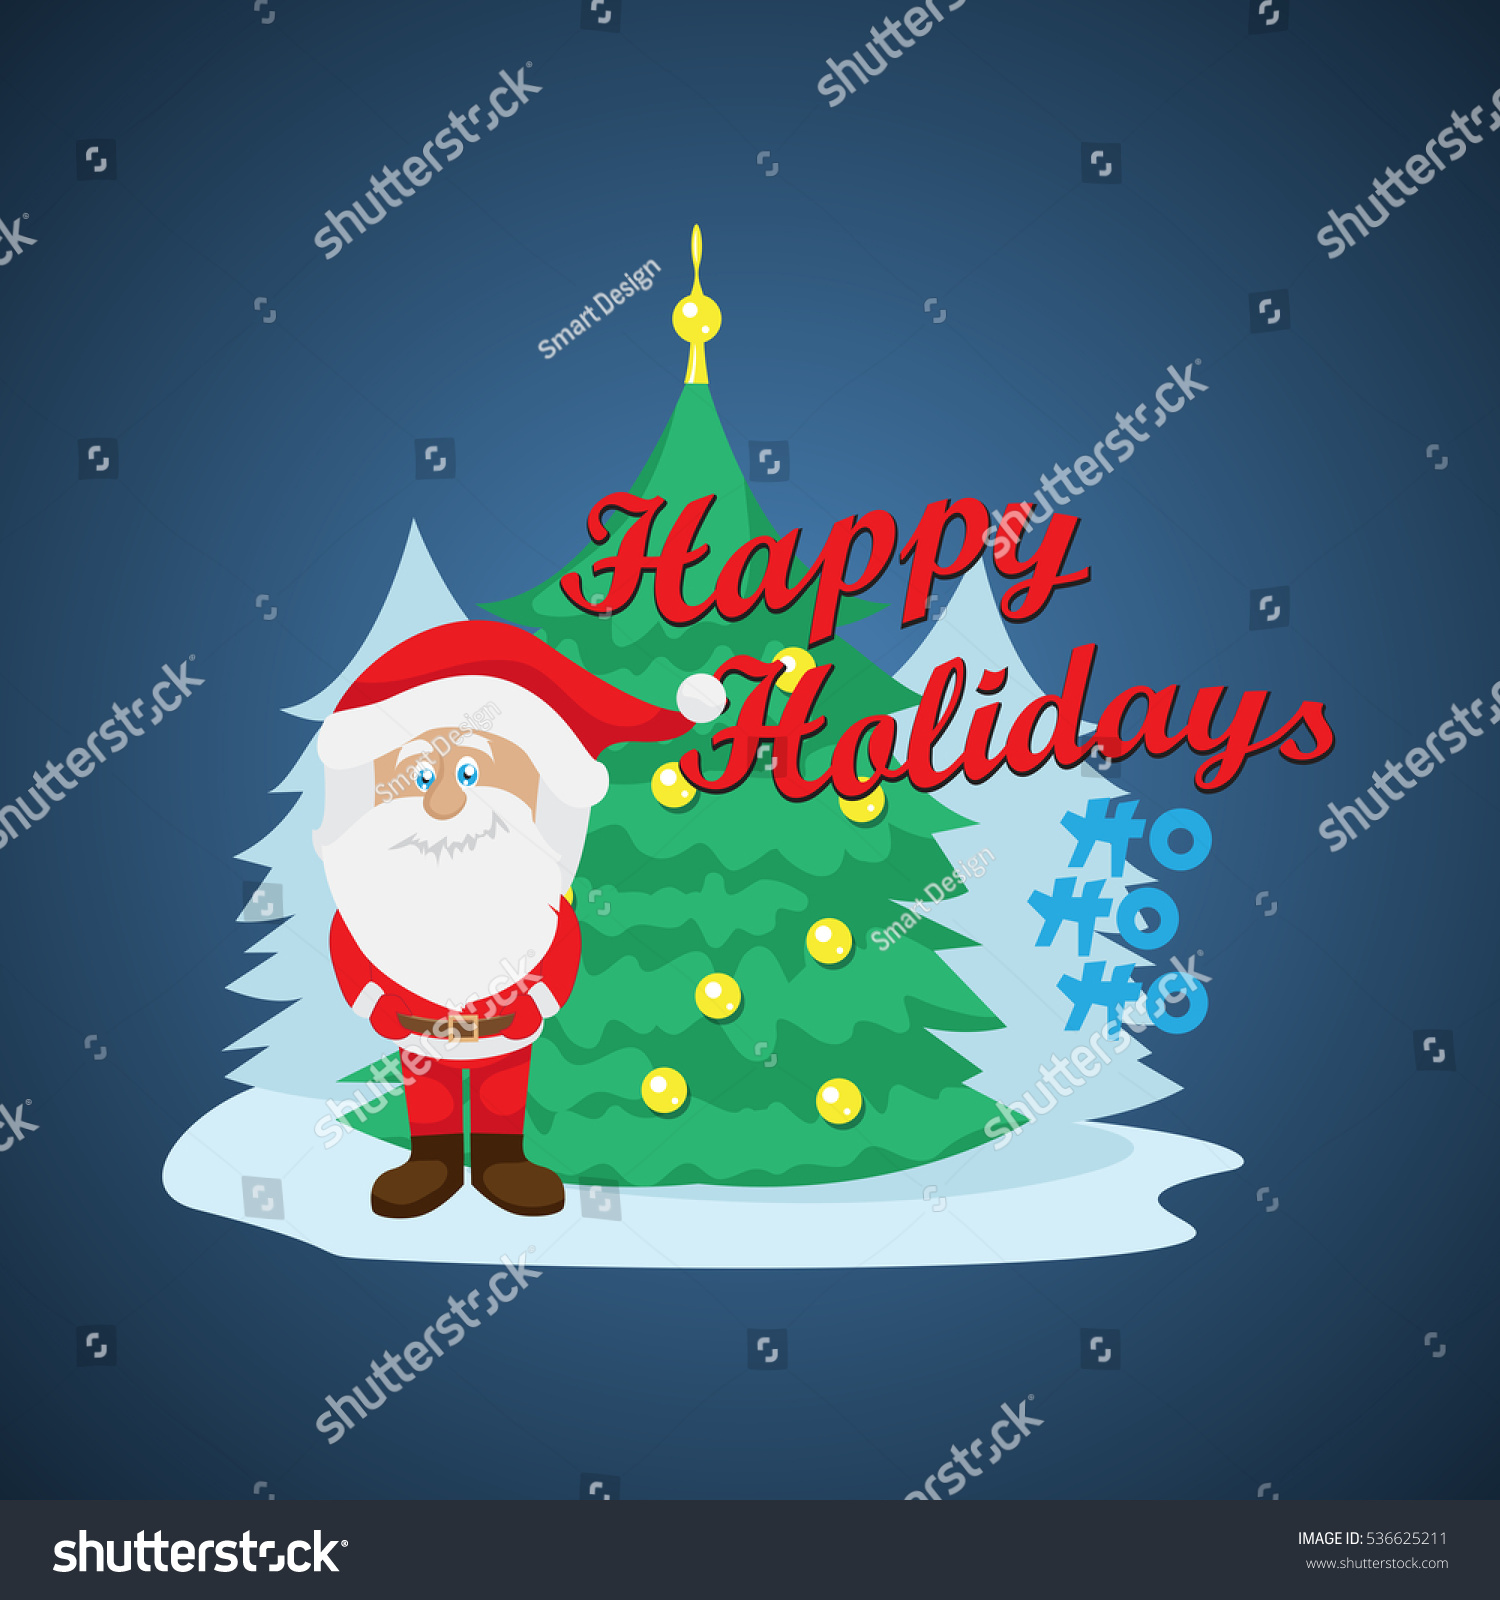 Santa Claus Greeting Card - Isolated On Blue Background, Vector Illustration, Graphic Design. Concept For Web, Websites and Print Material. Template For Social Media Network, Newsletter And Ads #536625211